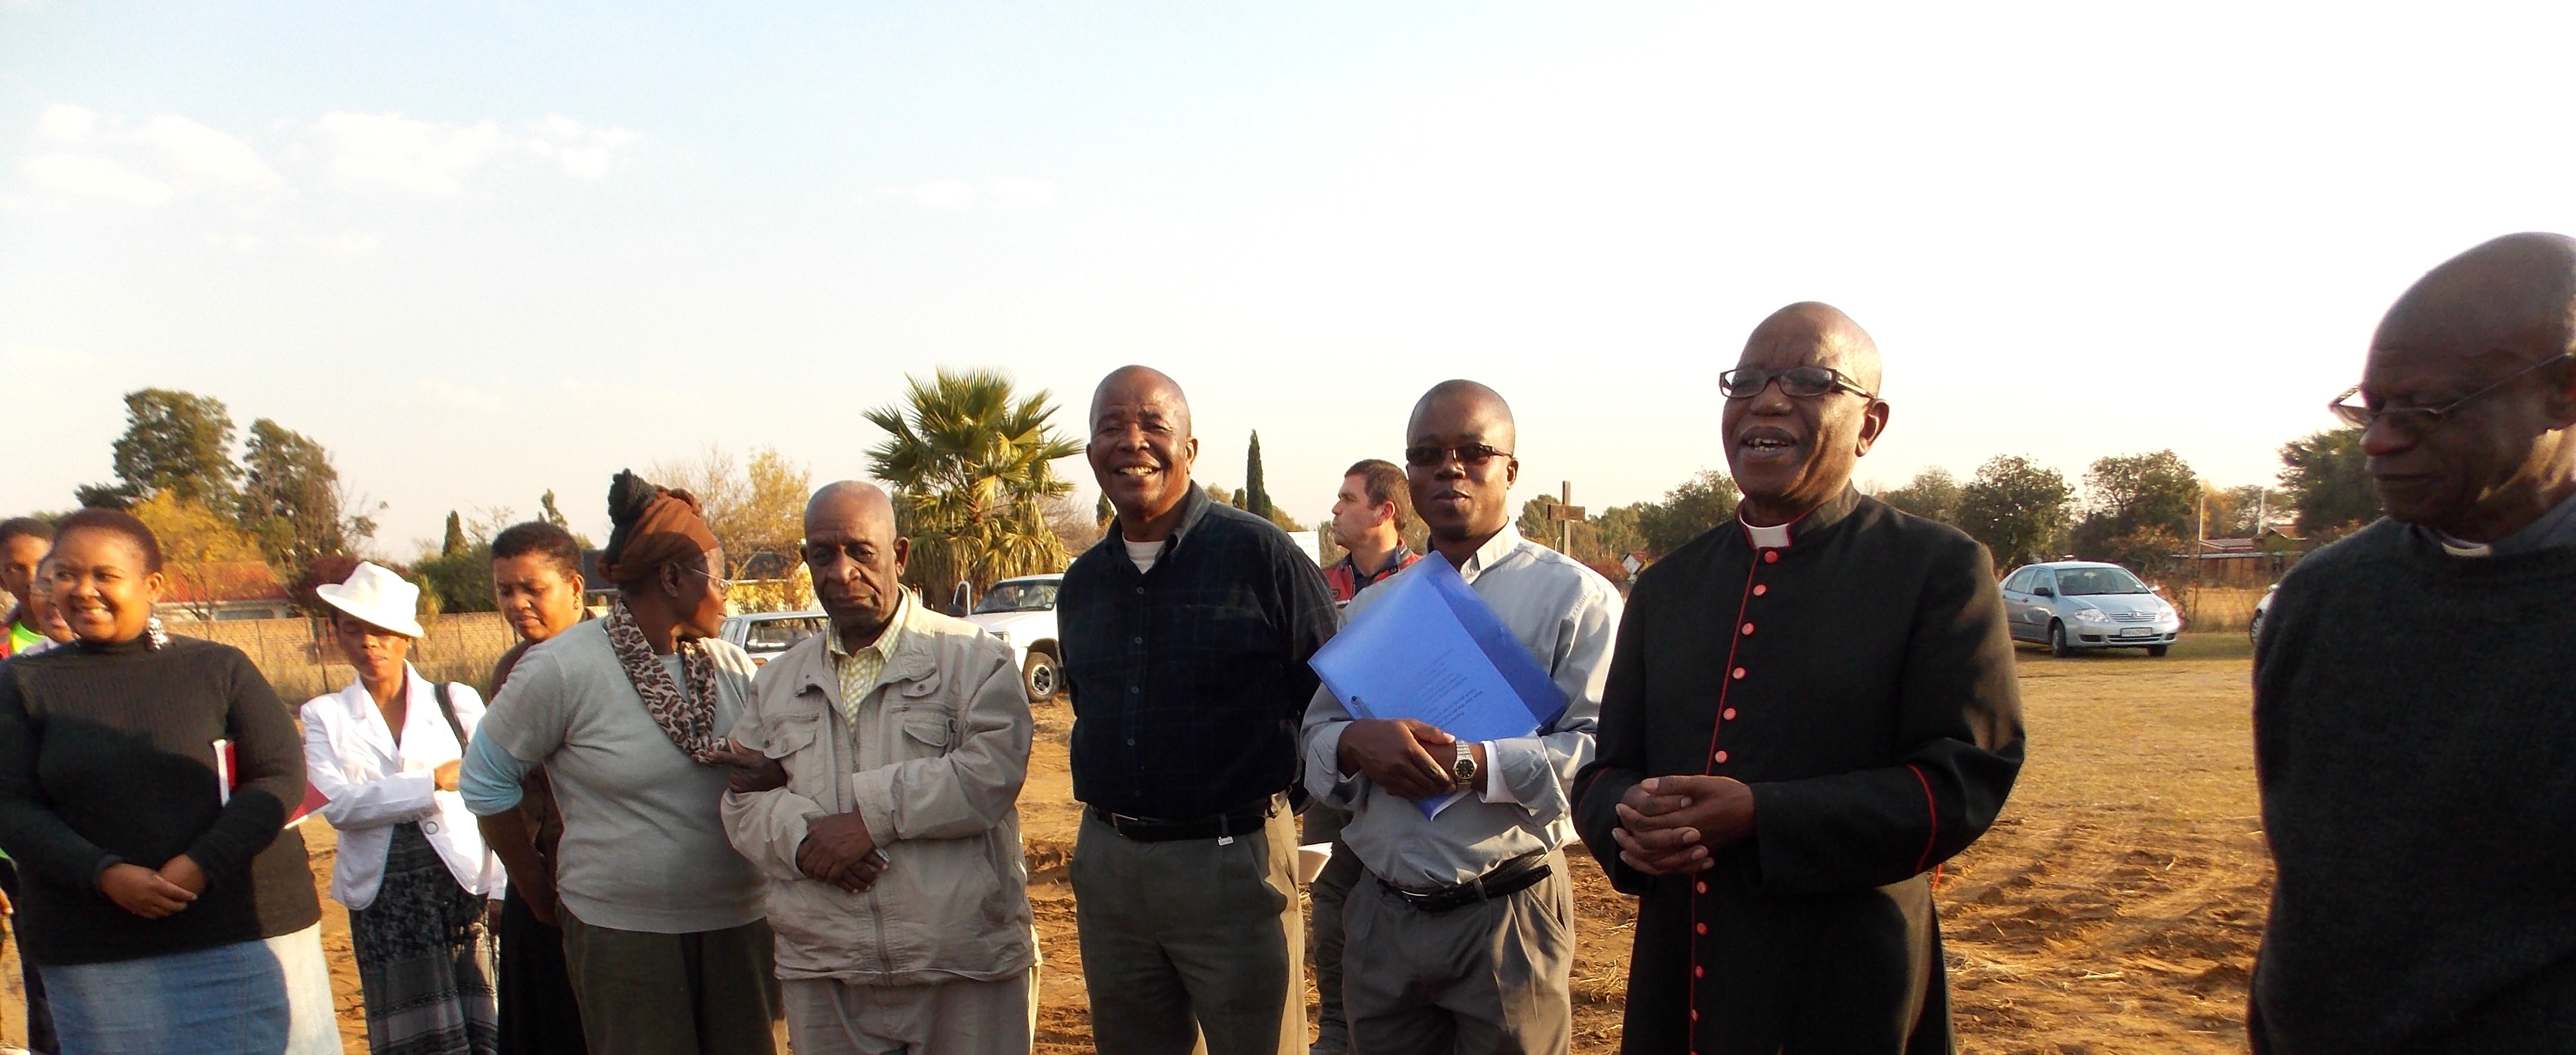 Finding Missionary Joy in Post-Apartheid South Africa